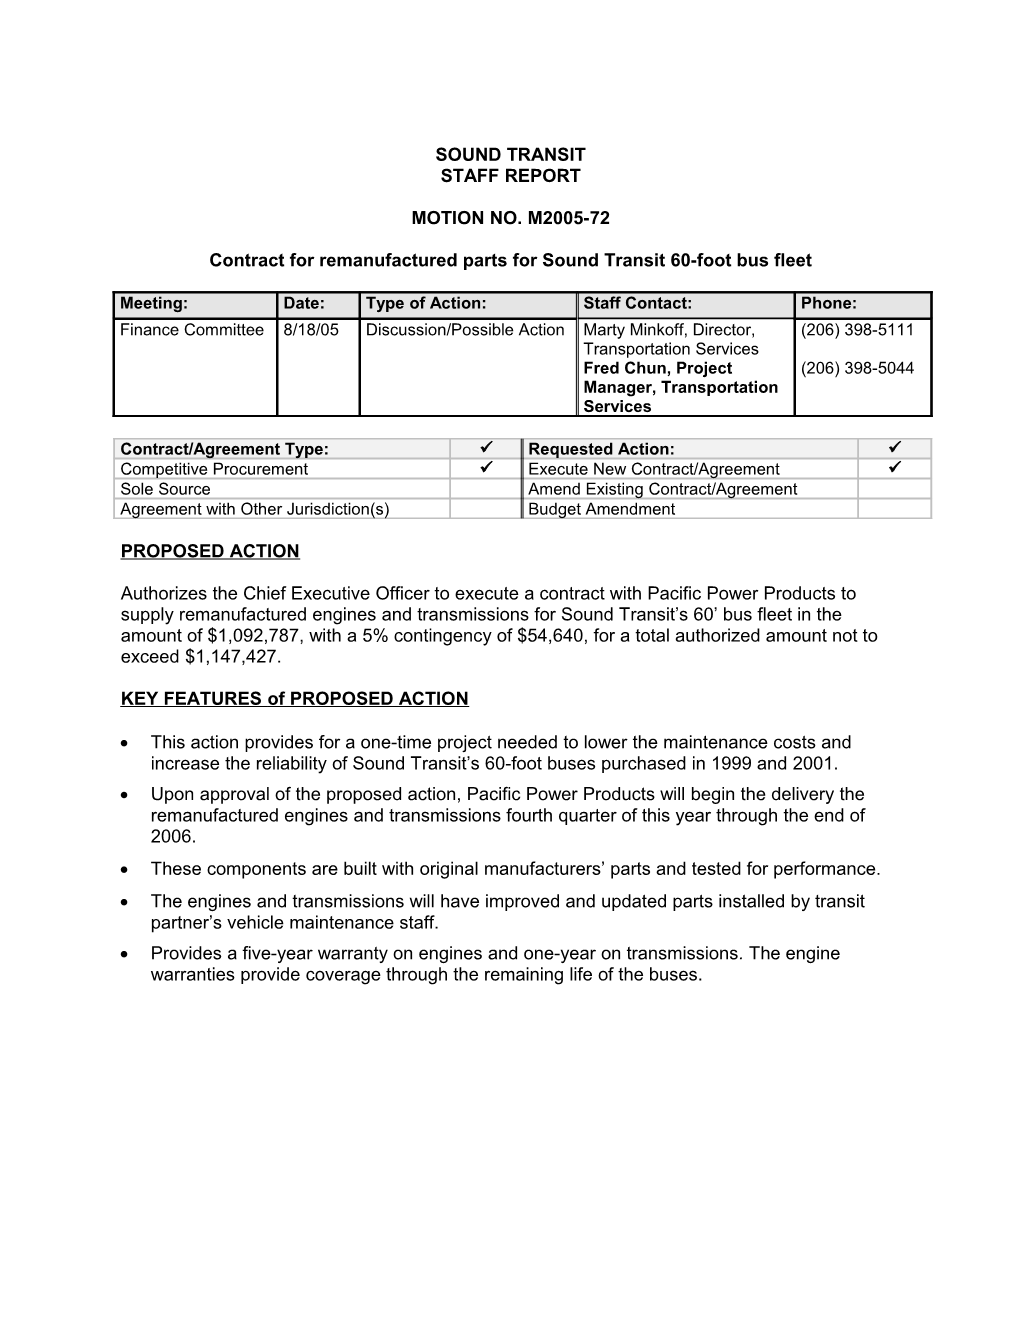 Contract for Remanufactured Parts for Sound Transit 60-Foot Bus Fleet